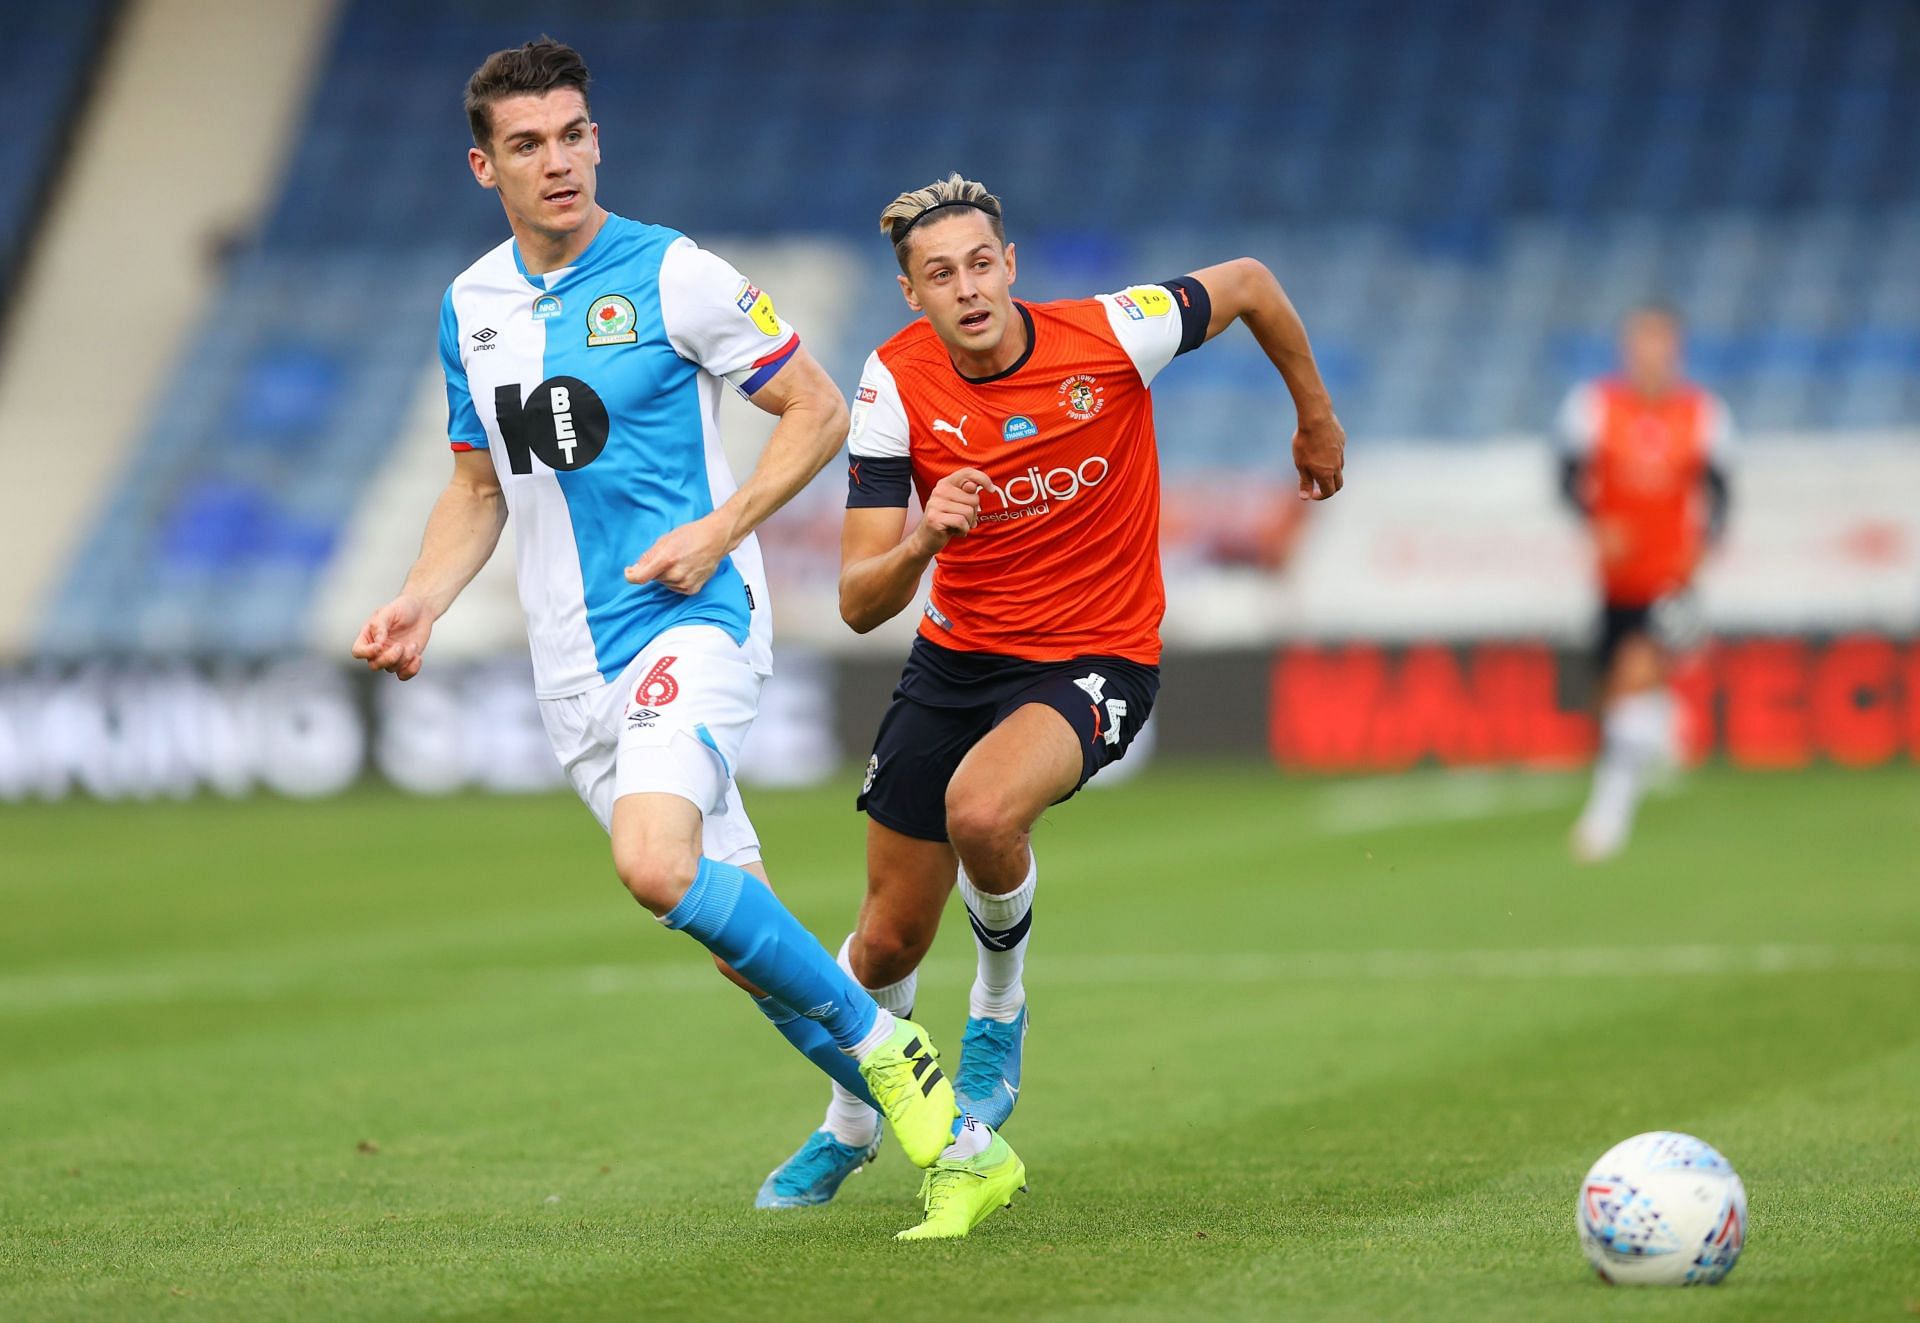 Luton Town play host to Blackburn Rovers on Saturday